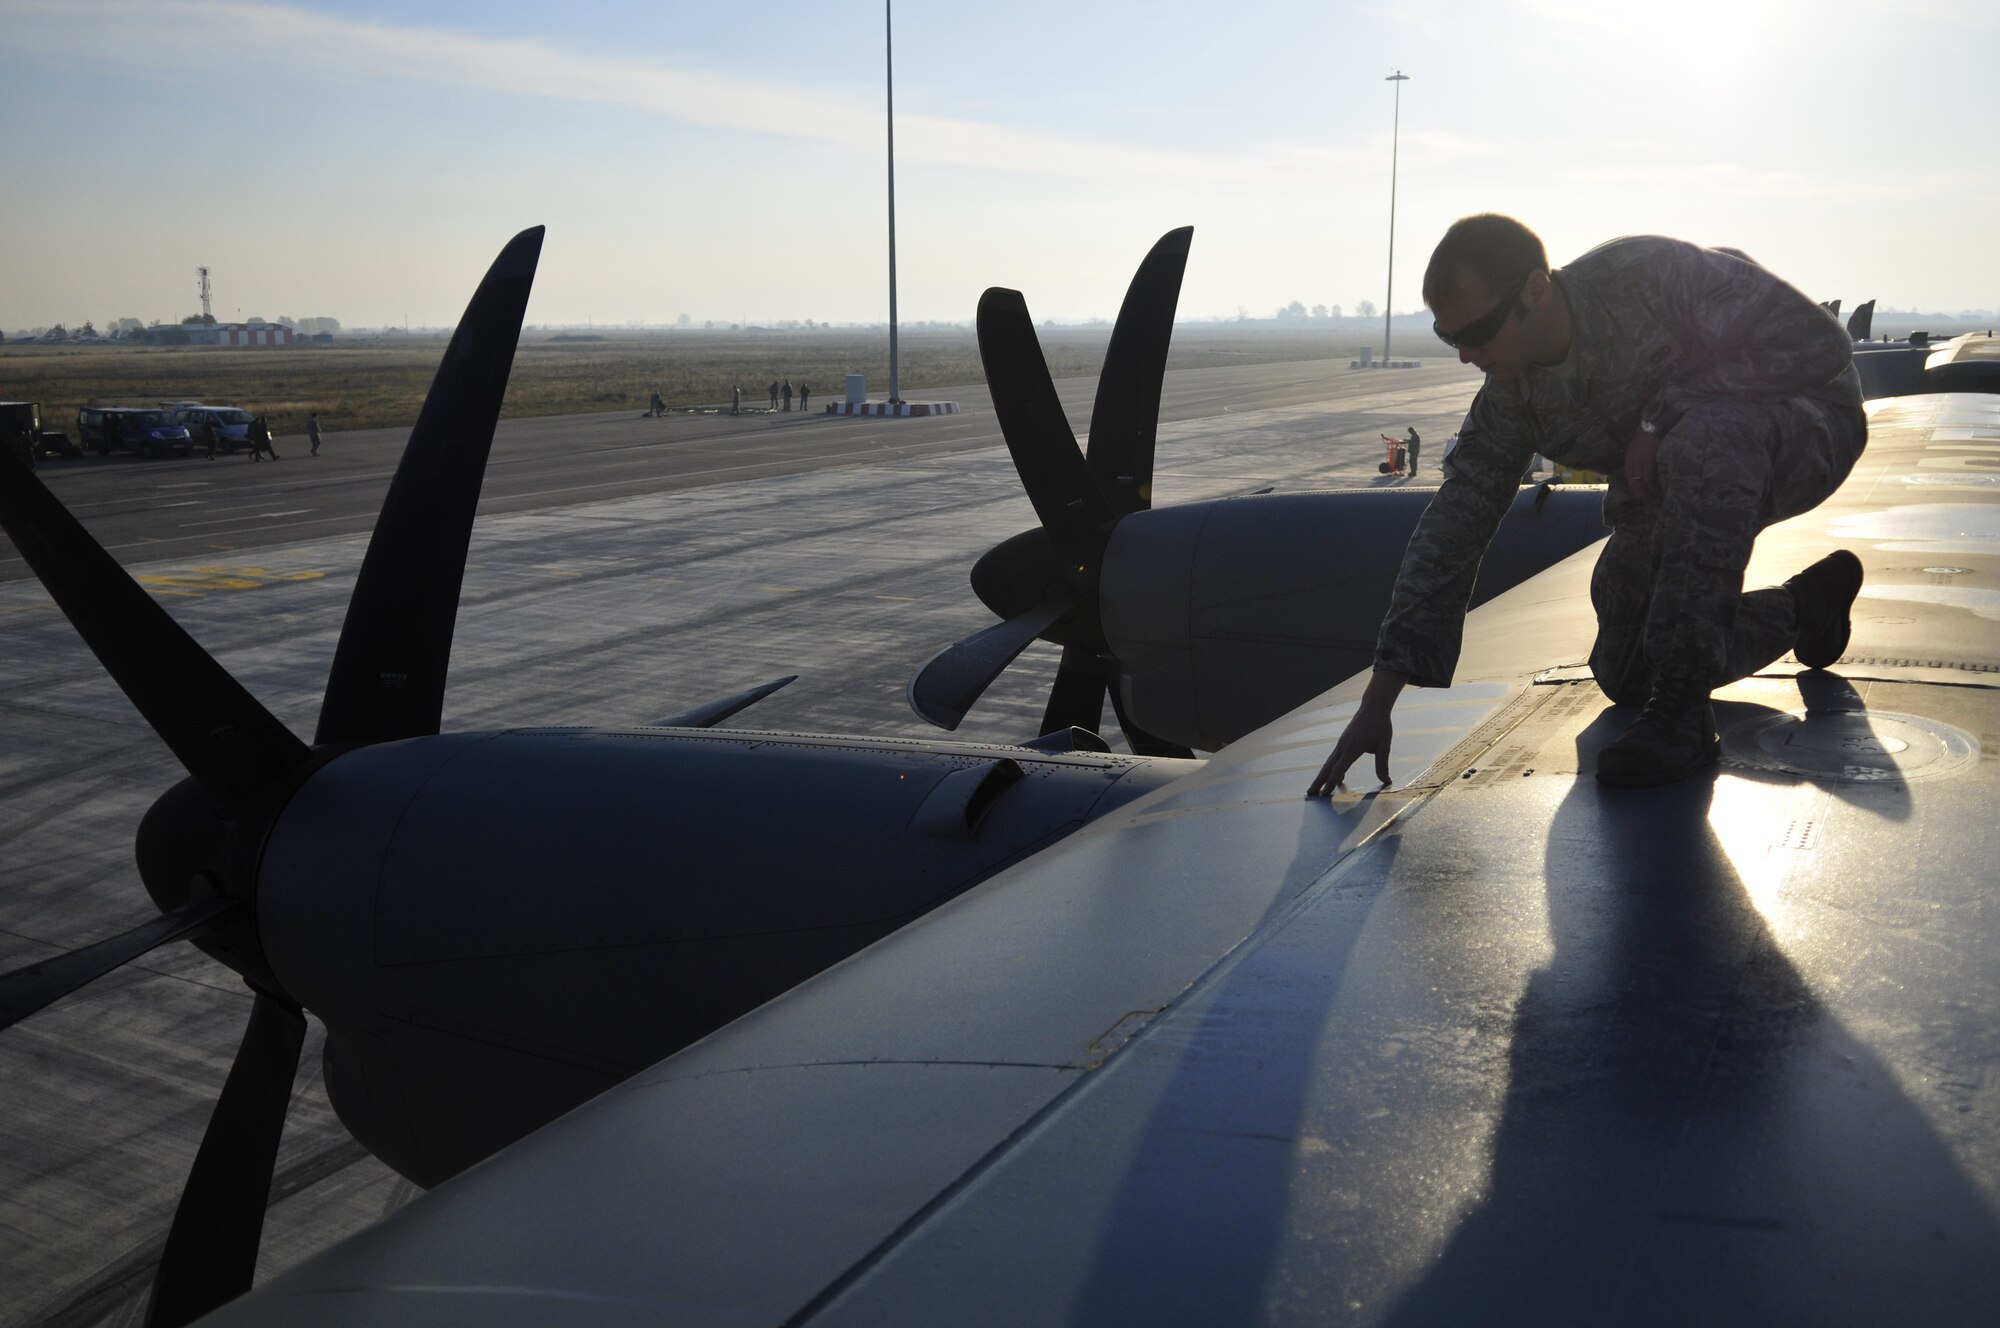 U.S. Air Force Senior Airman Shaun Moody, 86th Aircraft Maintenance Squadron crew chief performs a dropped object prevention program inspection on a C-130J Super Hercules prior to taking off at Thracian Fall 2010, Oct. 25, at the Plovdiv, Bulgaria airport. Thracian Fall 2010 is a two week on-site training deployment designed to build partnership between the U.S. and Bulgarian Air Force. During Thracian Fall U.S. paratroopers were able to assist 1077 Bulgarian Airmen receive valuable jump training. (U.S. Air Force photo by Tech. Sgt. Michael Voss)